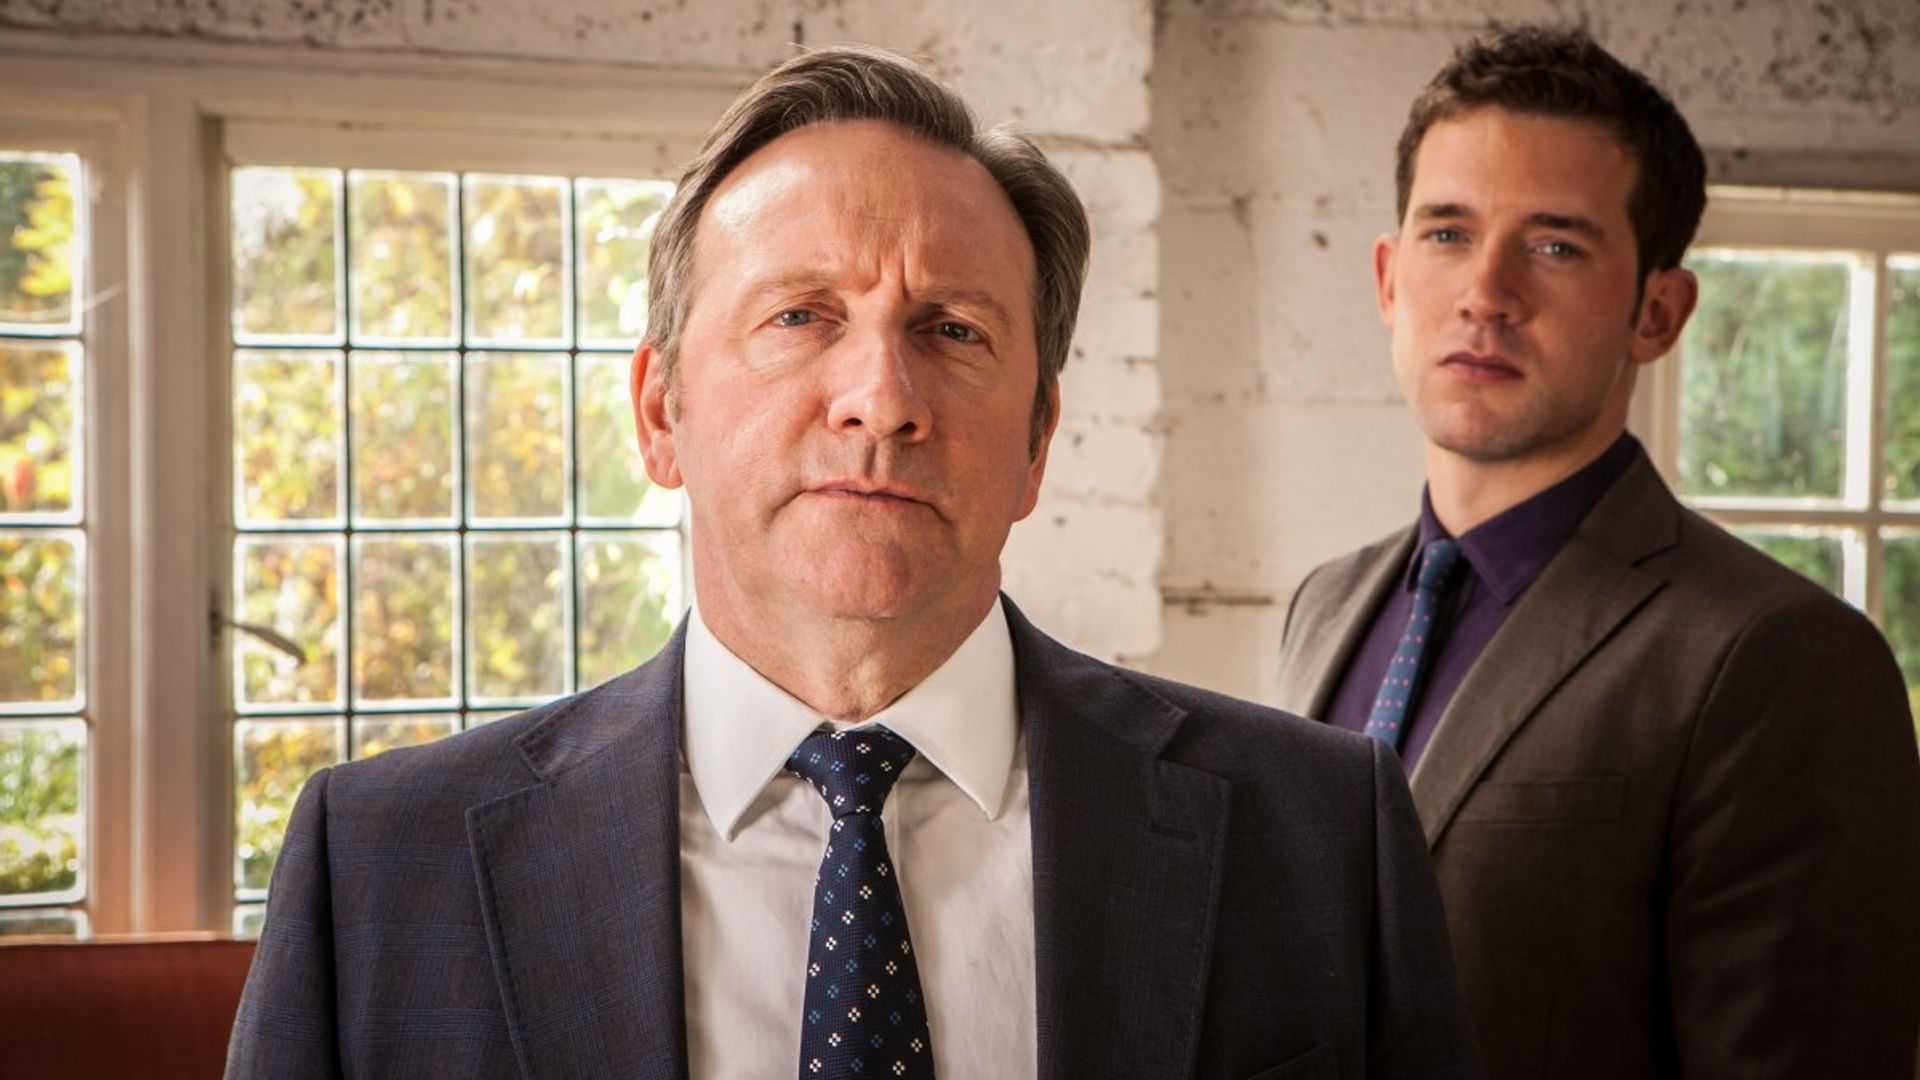 Midsomer Murders star Neil Dudgeon had small part on show before landing re...